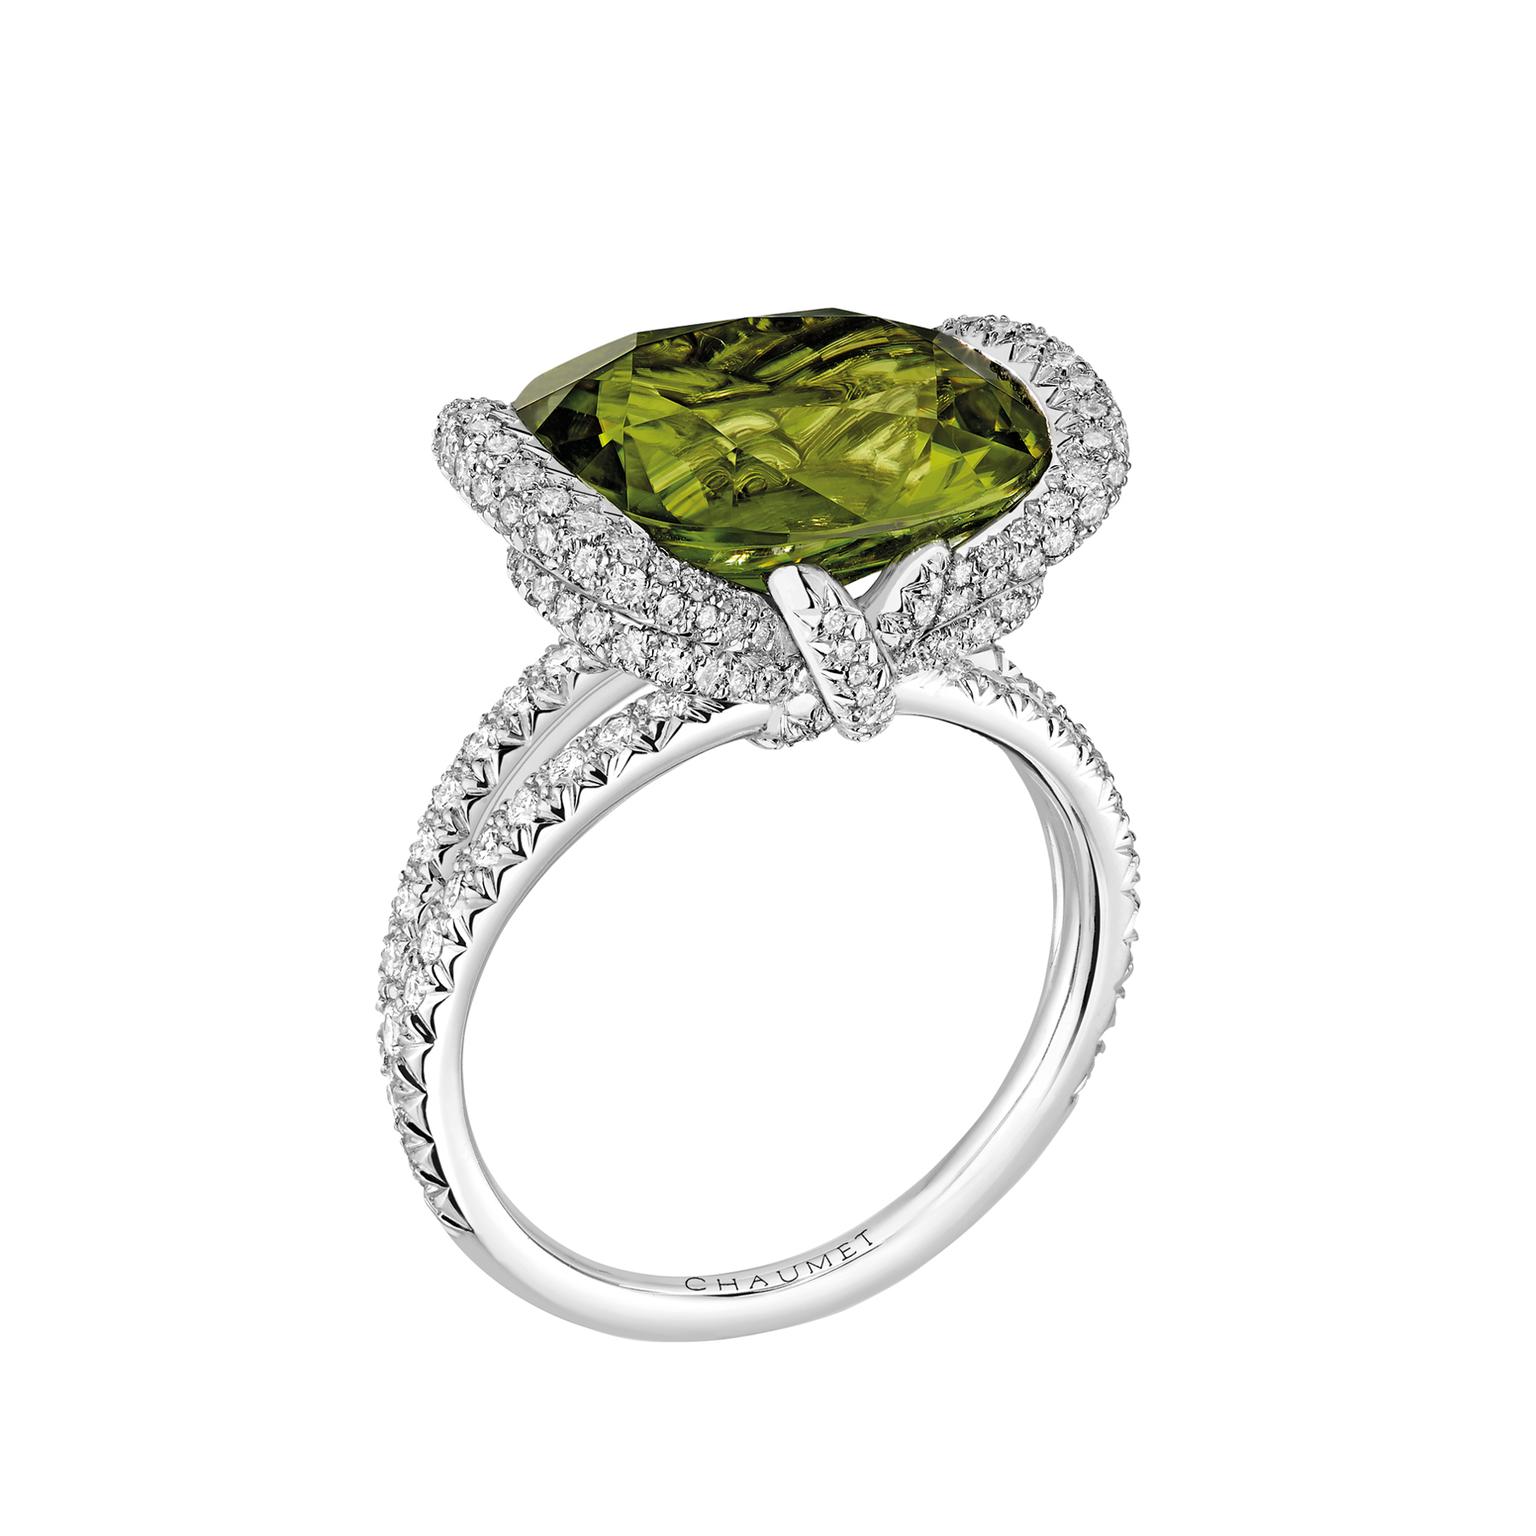 Chaumet Liens d'Amour peridot ring